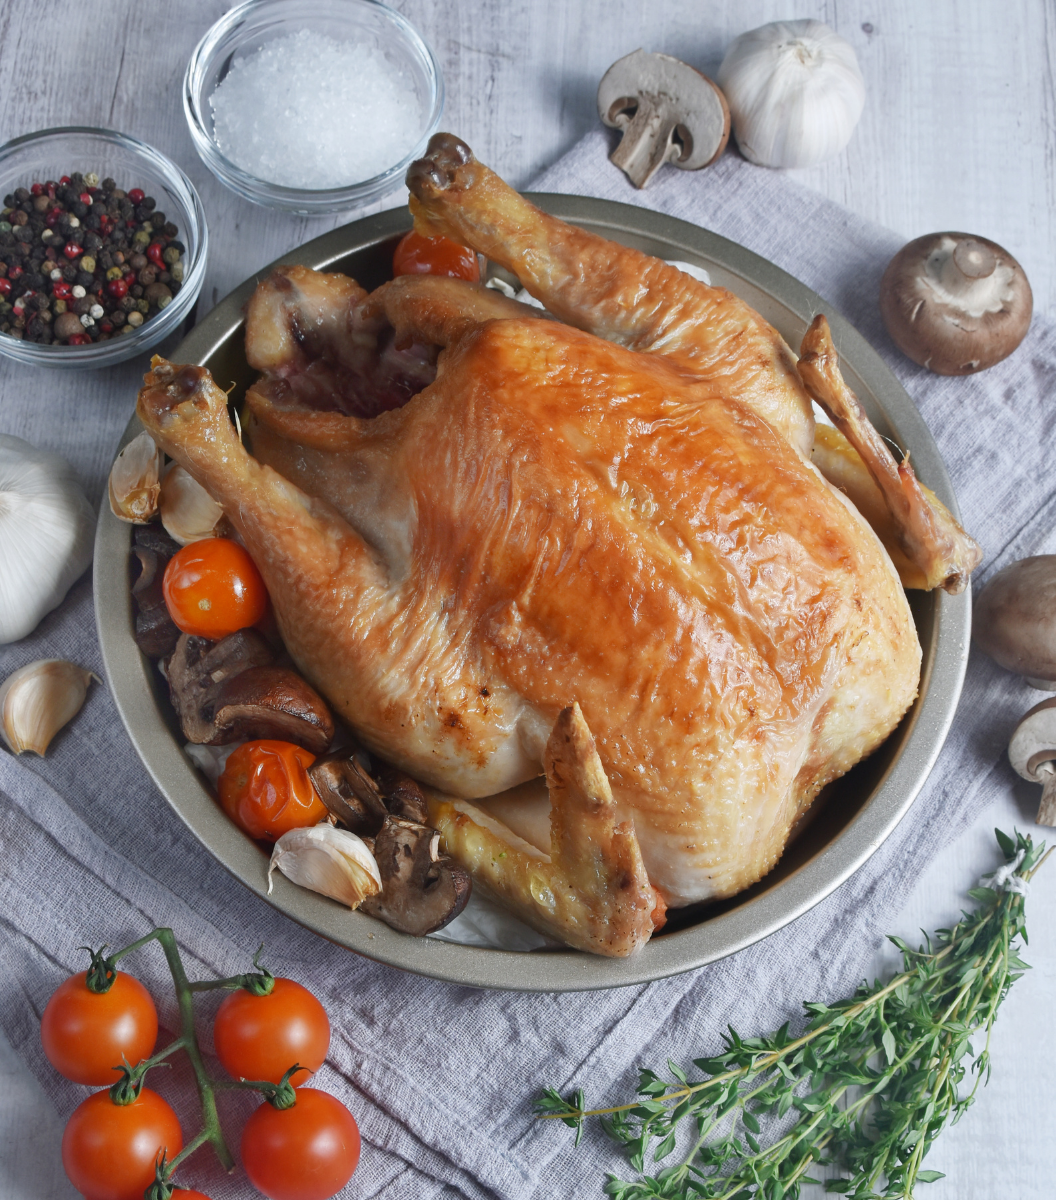 Perfectly roasted tender organic local whole chicken from Sasha's Fine Foods